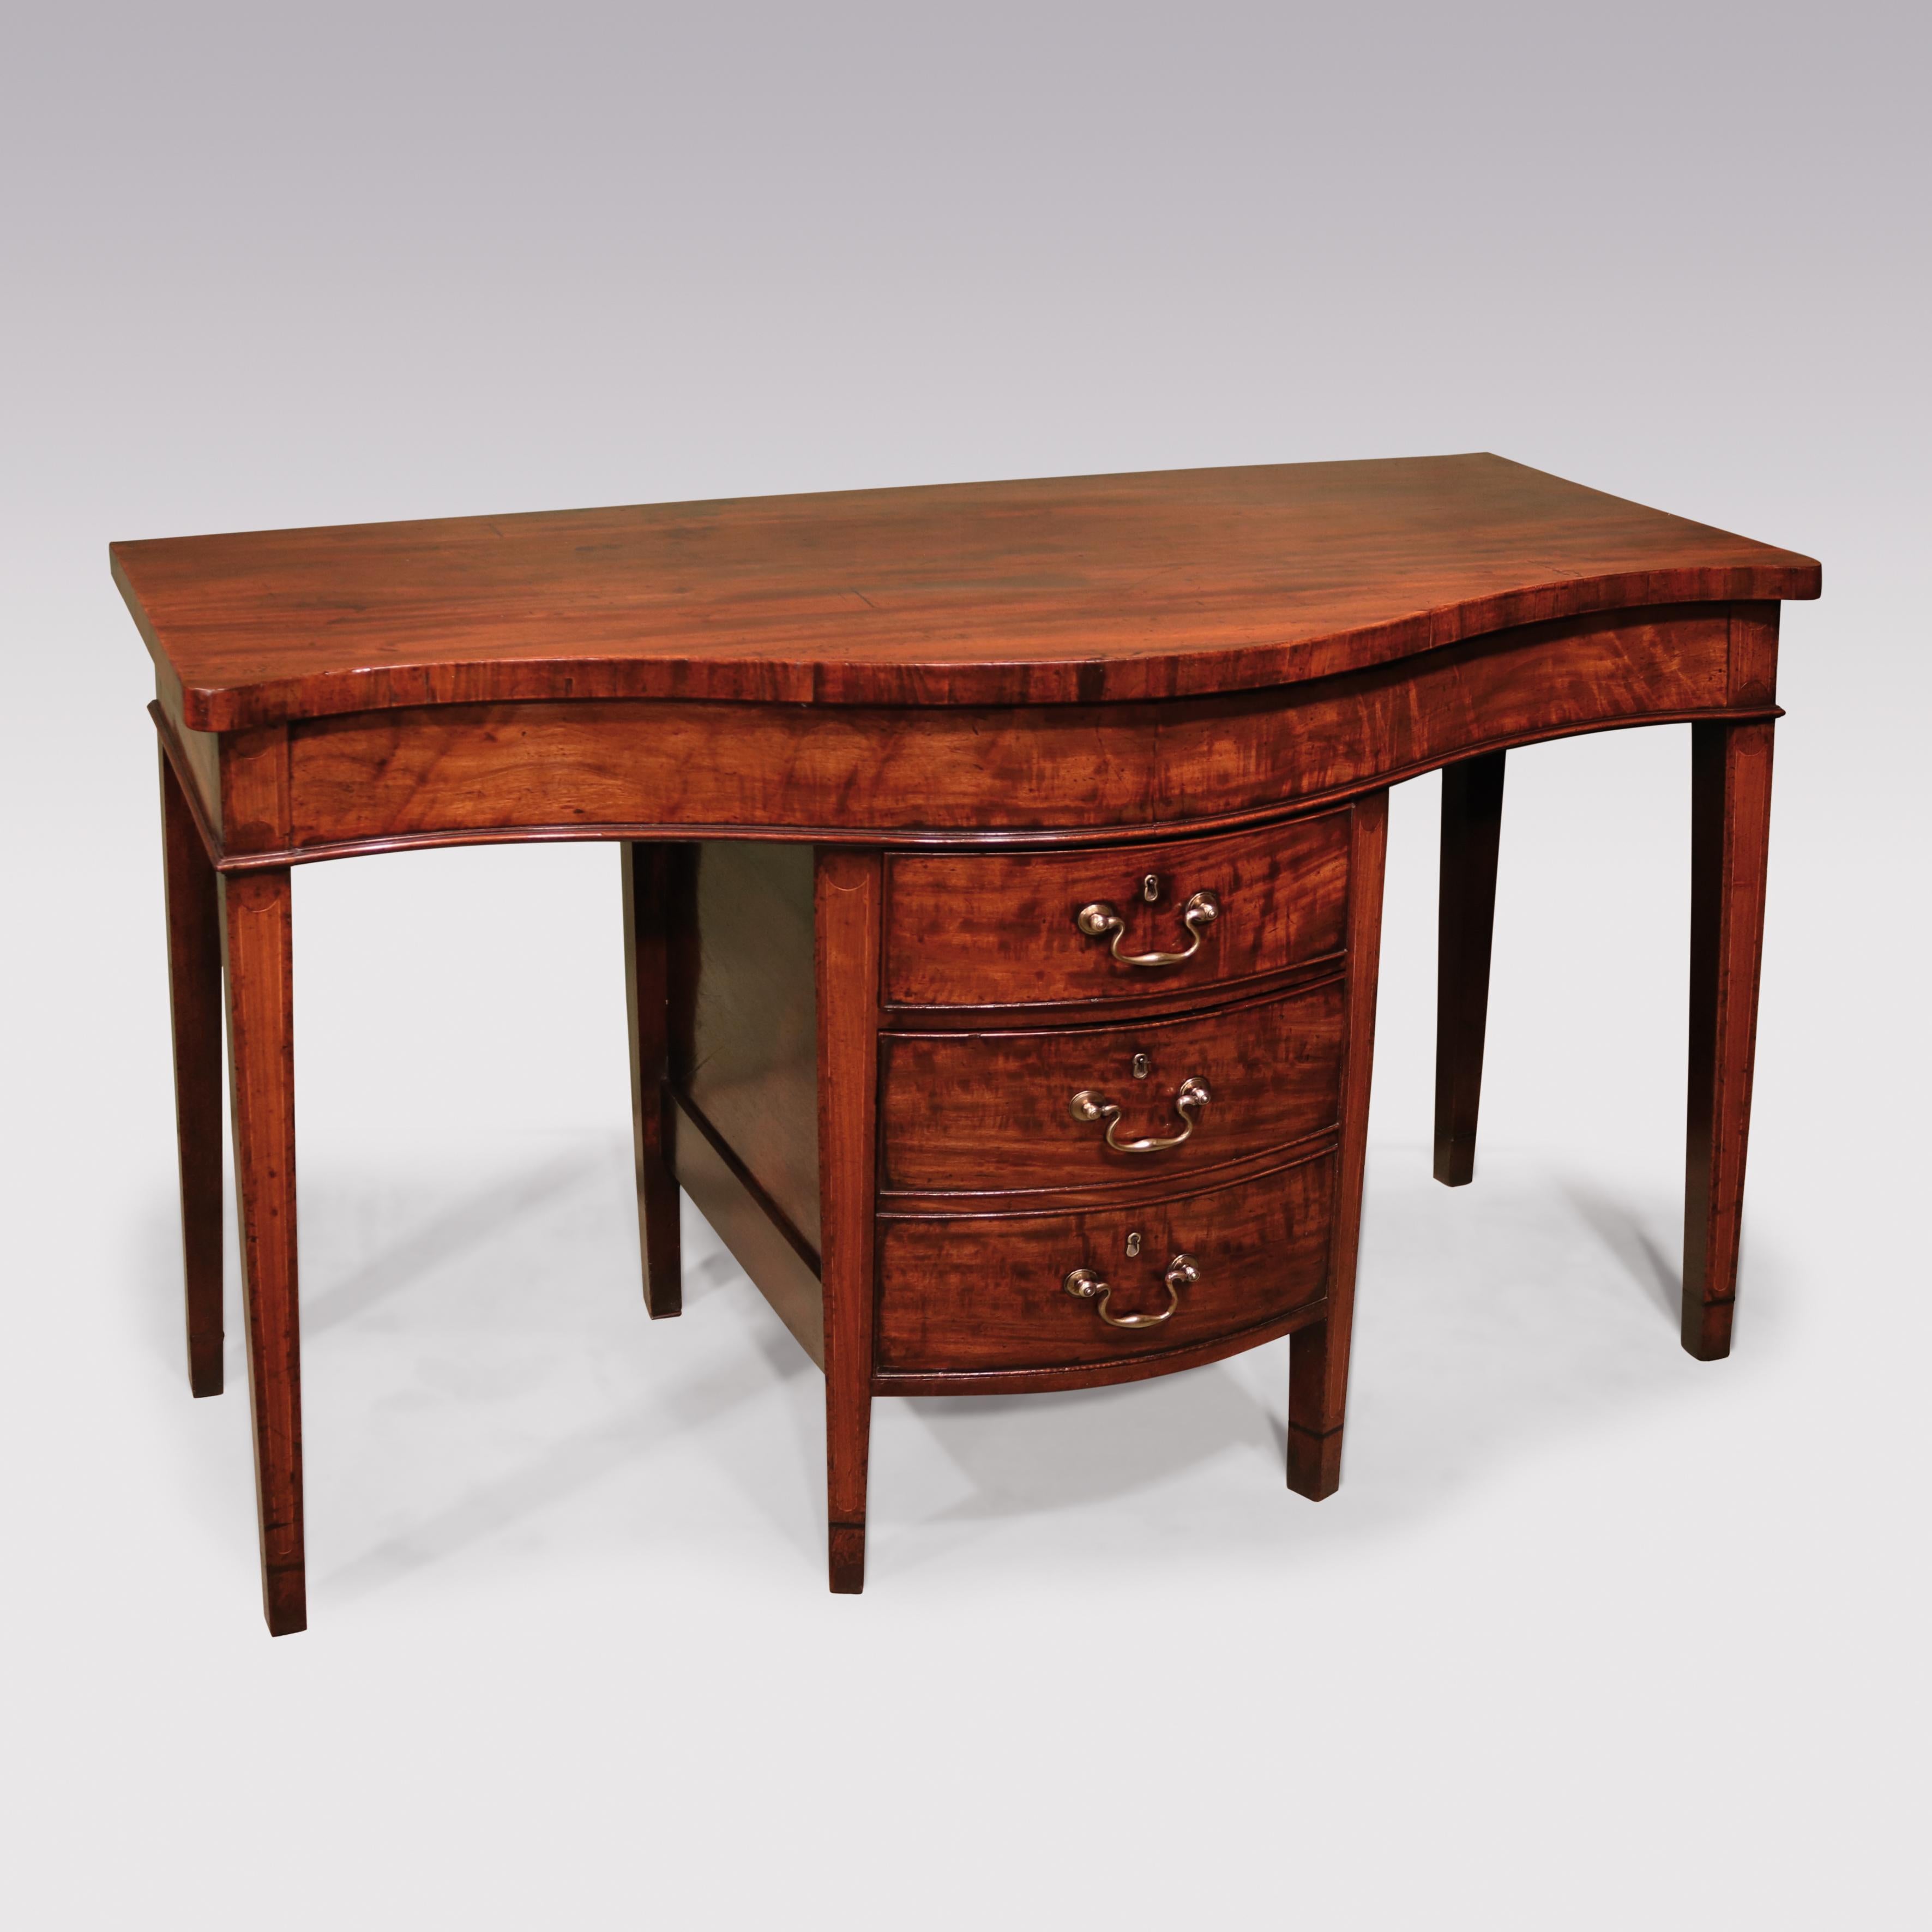 An unusual late 18th century well-figured mahogany serving table having serpentine top fitted with unusual centre section enclosing cutlery drawer and double cellarette drawer, retaining original swan-neck handles, supported on square tapering legs